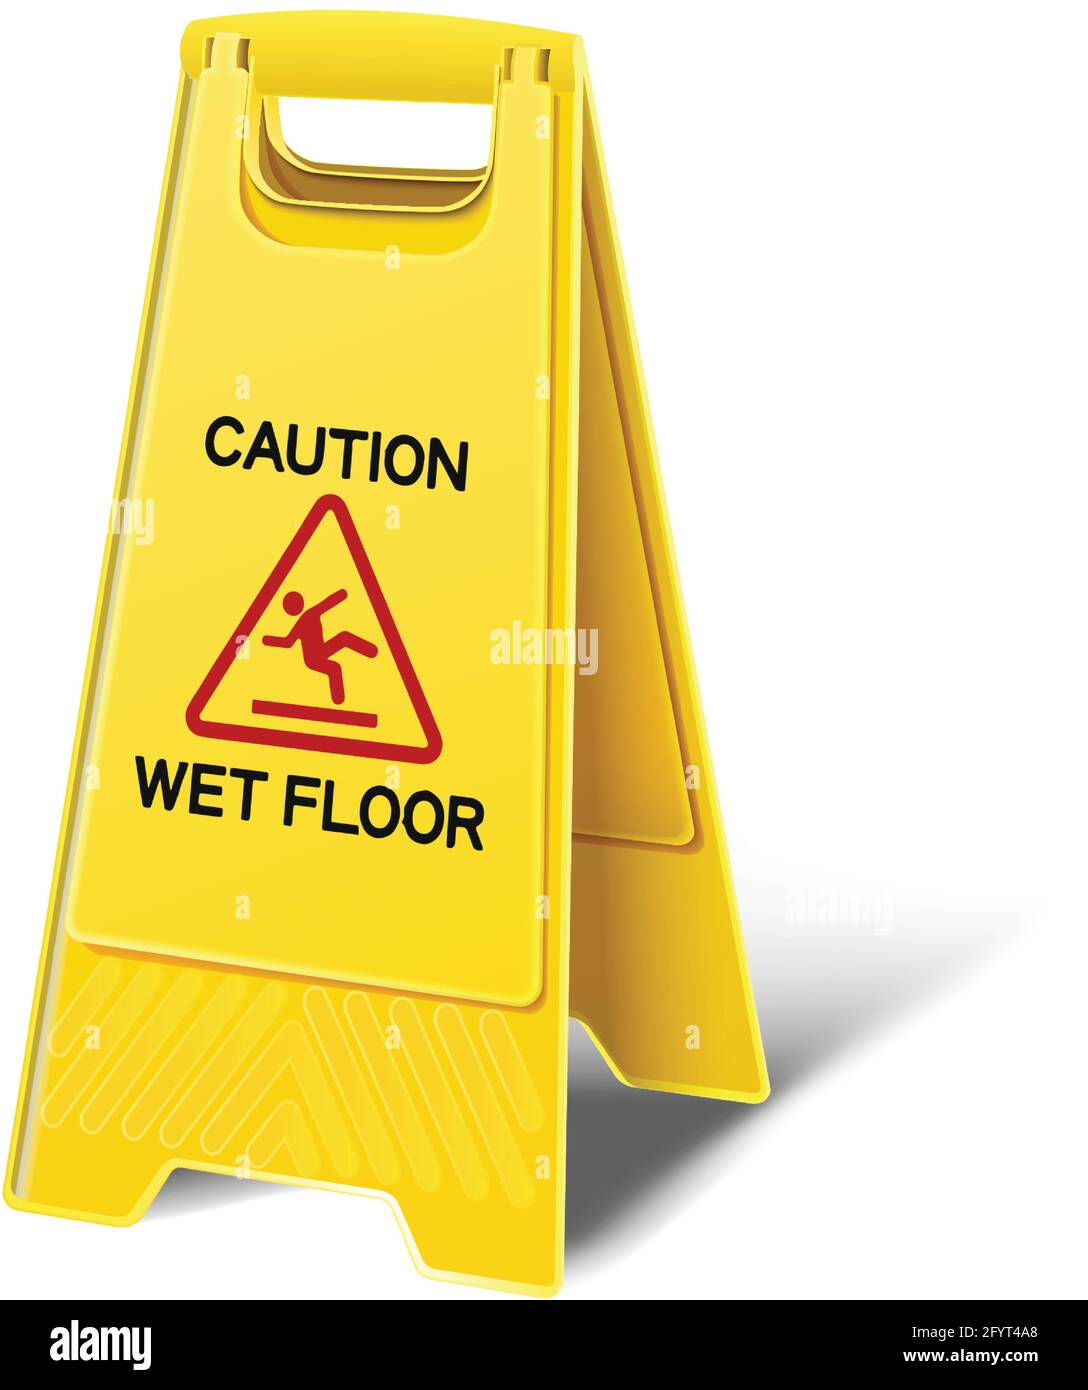 3d realistic vector caution wet floor yellow plastic floor sign. Isolated icon illustration on white background. Stock Vector